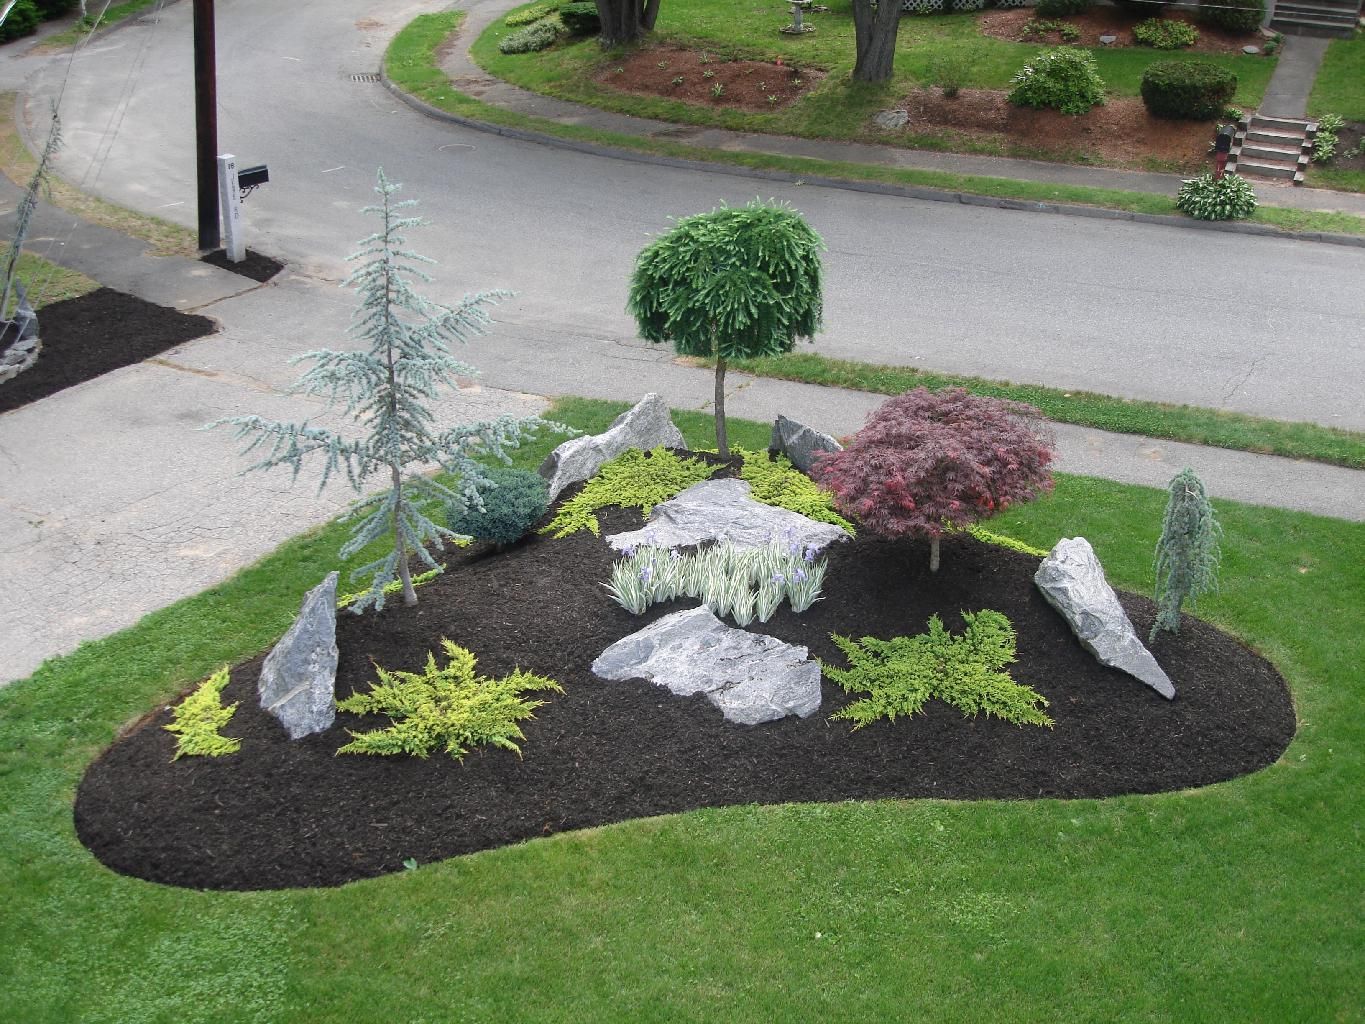 landscaping designs simple landscape designs with rock beds - this is similar to what KUCYVUX